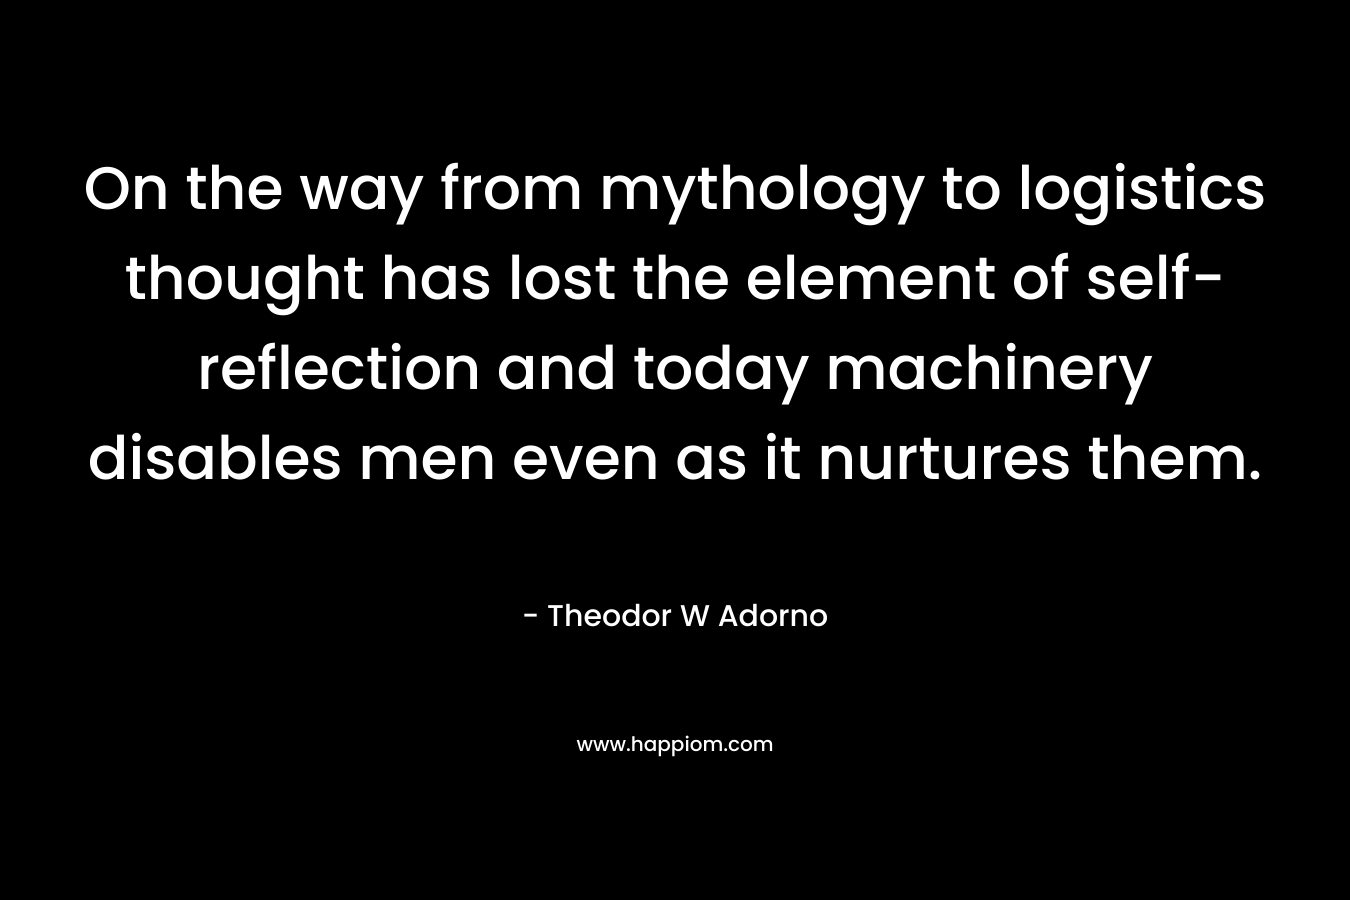 On the way from mythology to logistics thought has lost the element of self-reflection and today machinery disables men even as it nurtures them. – Theodor W Adorno